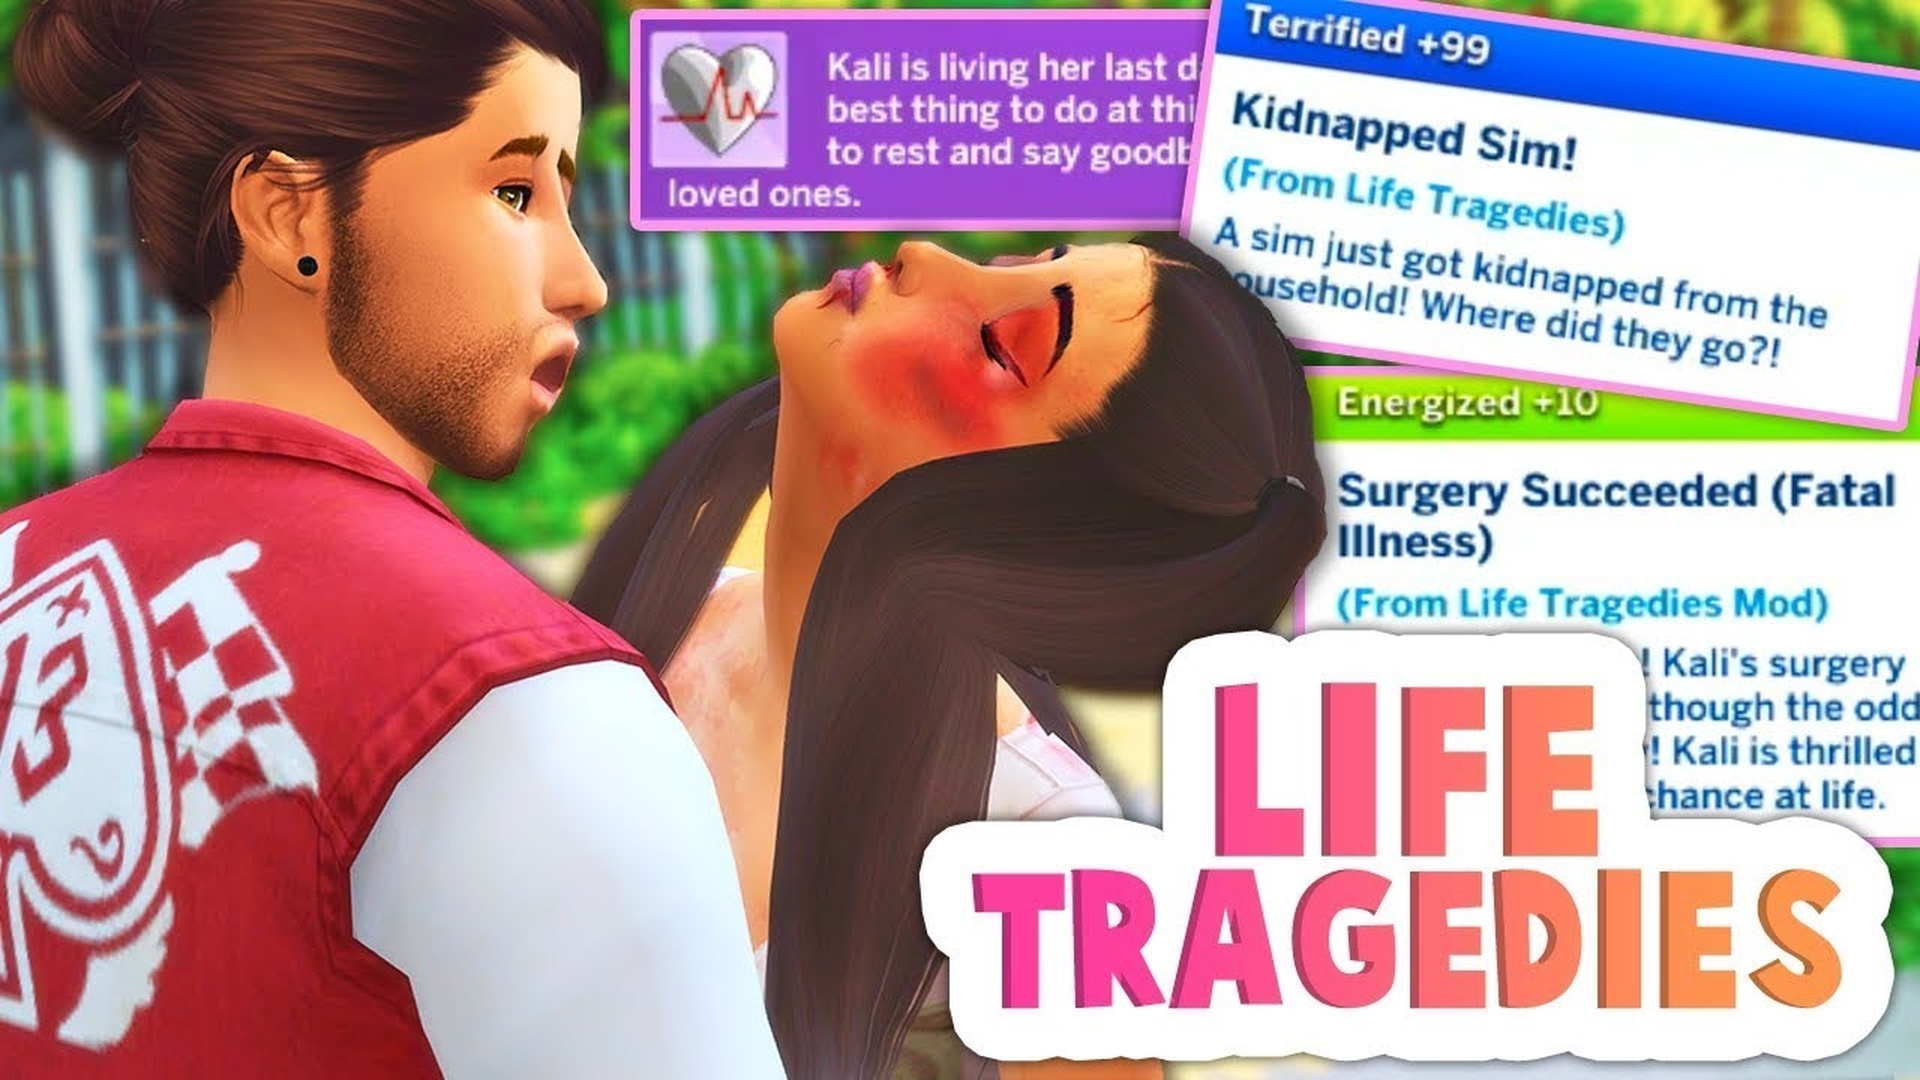 In this article, we are going to cover how do you enable Life Tragedies mod Sims 4, so you can make your Sims go through the tragedies of life.